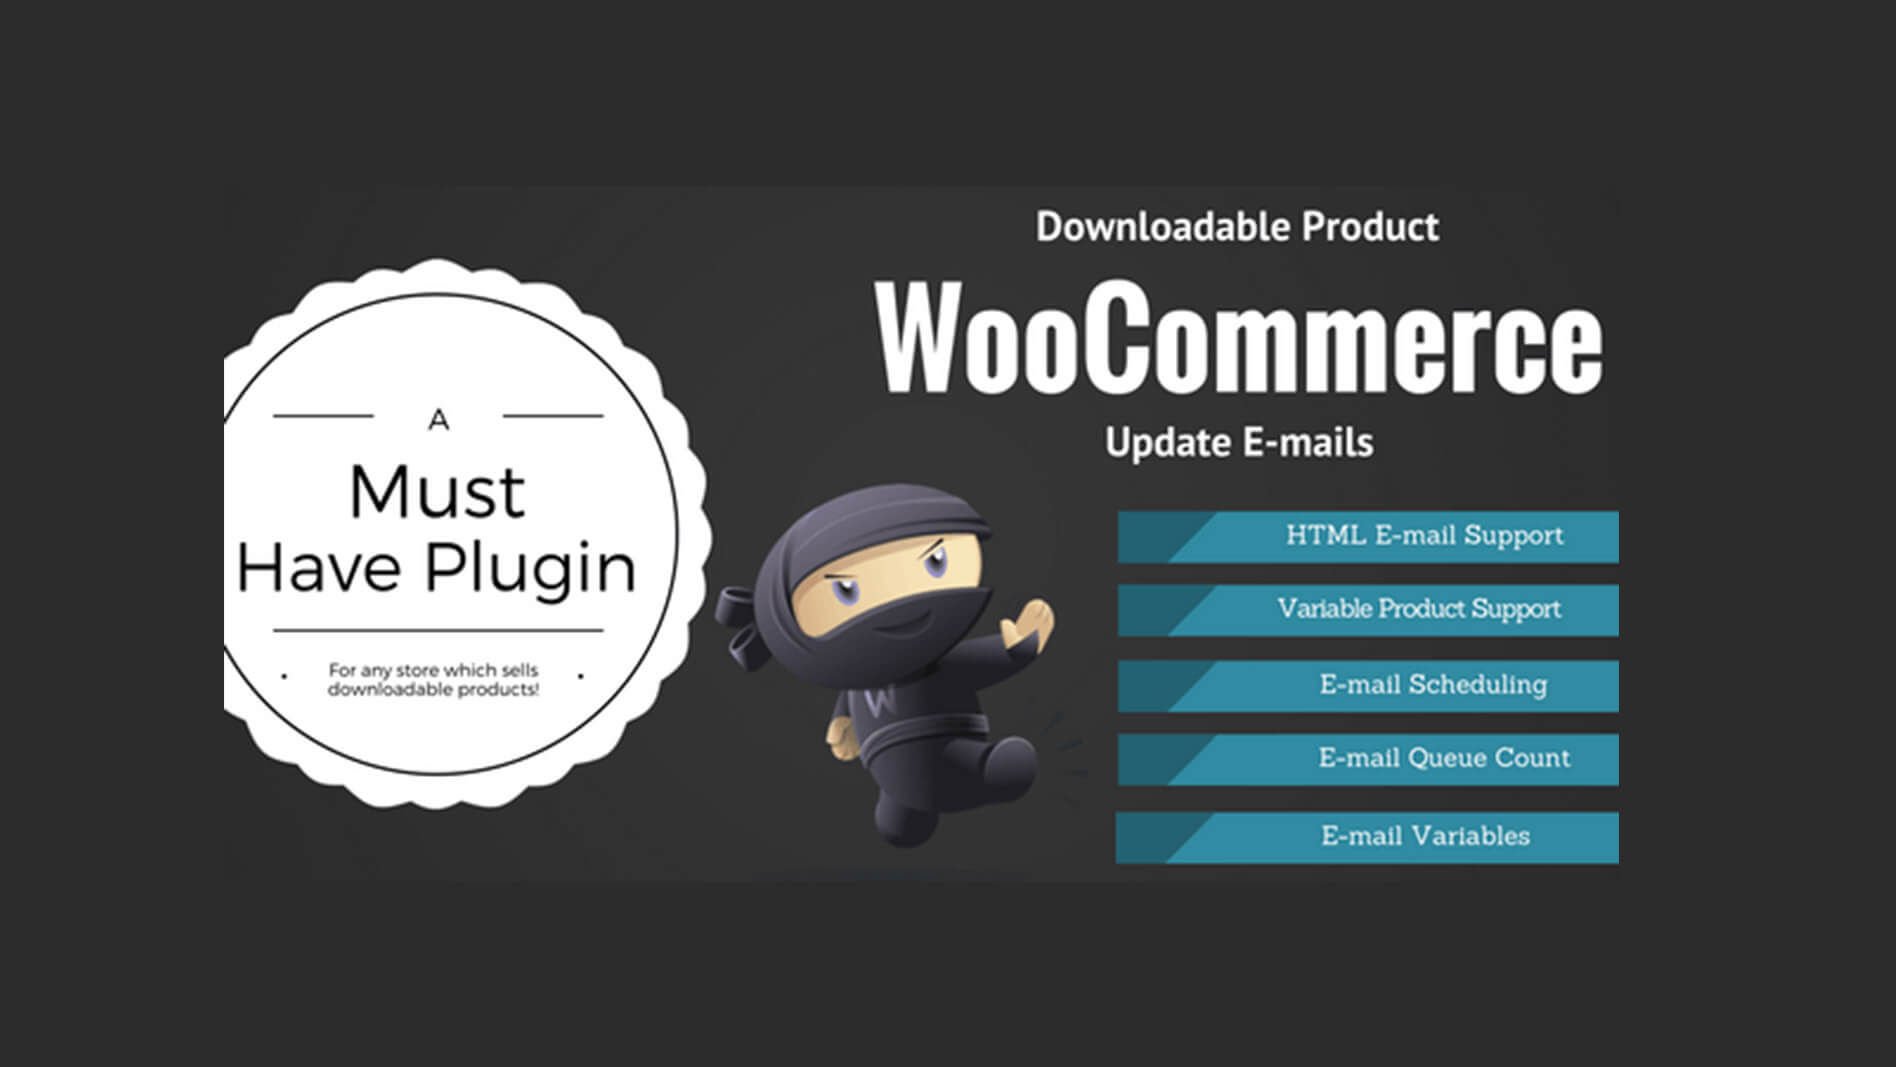 WooCommerce Downloadable Product Update E-mails.jpg